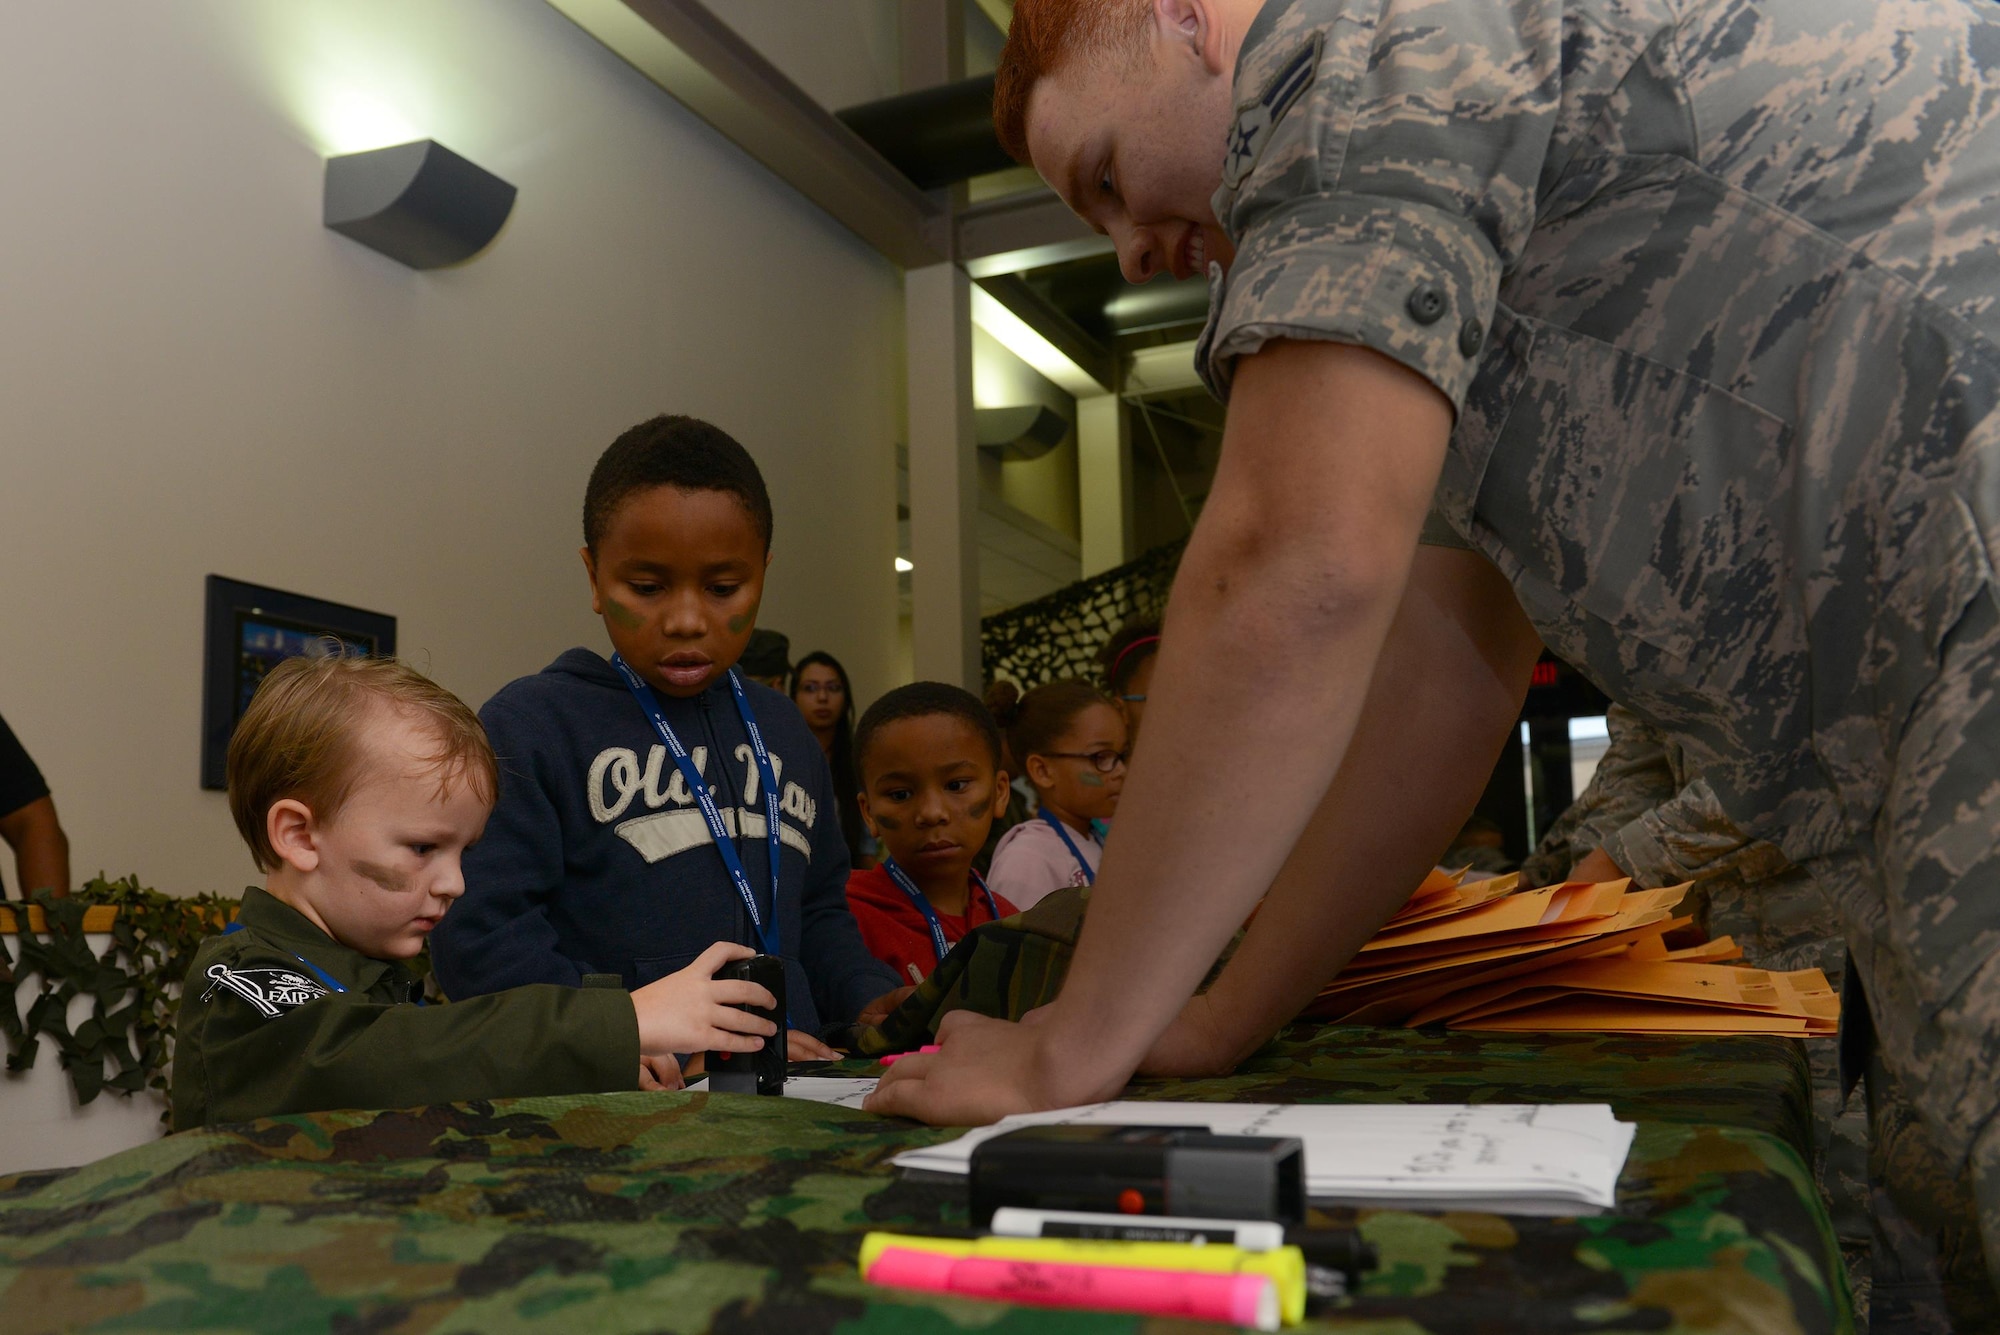 Airman 1st Class Leonardo Meza Camarena, 47th Comptroller Squadron financial technician, helps out-process one of Laughlin’s junior deployers, on Laughlin Air Force Base, Texas, Nov. 5, 2016. The Airman and Family Readiness Center held a mock deployment for base and local children to experience what a deployment could be like for military members. (U.S. Air Force photo/Airman 1st Class Benjamin N. Valmoja)